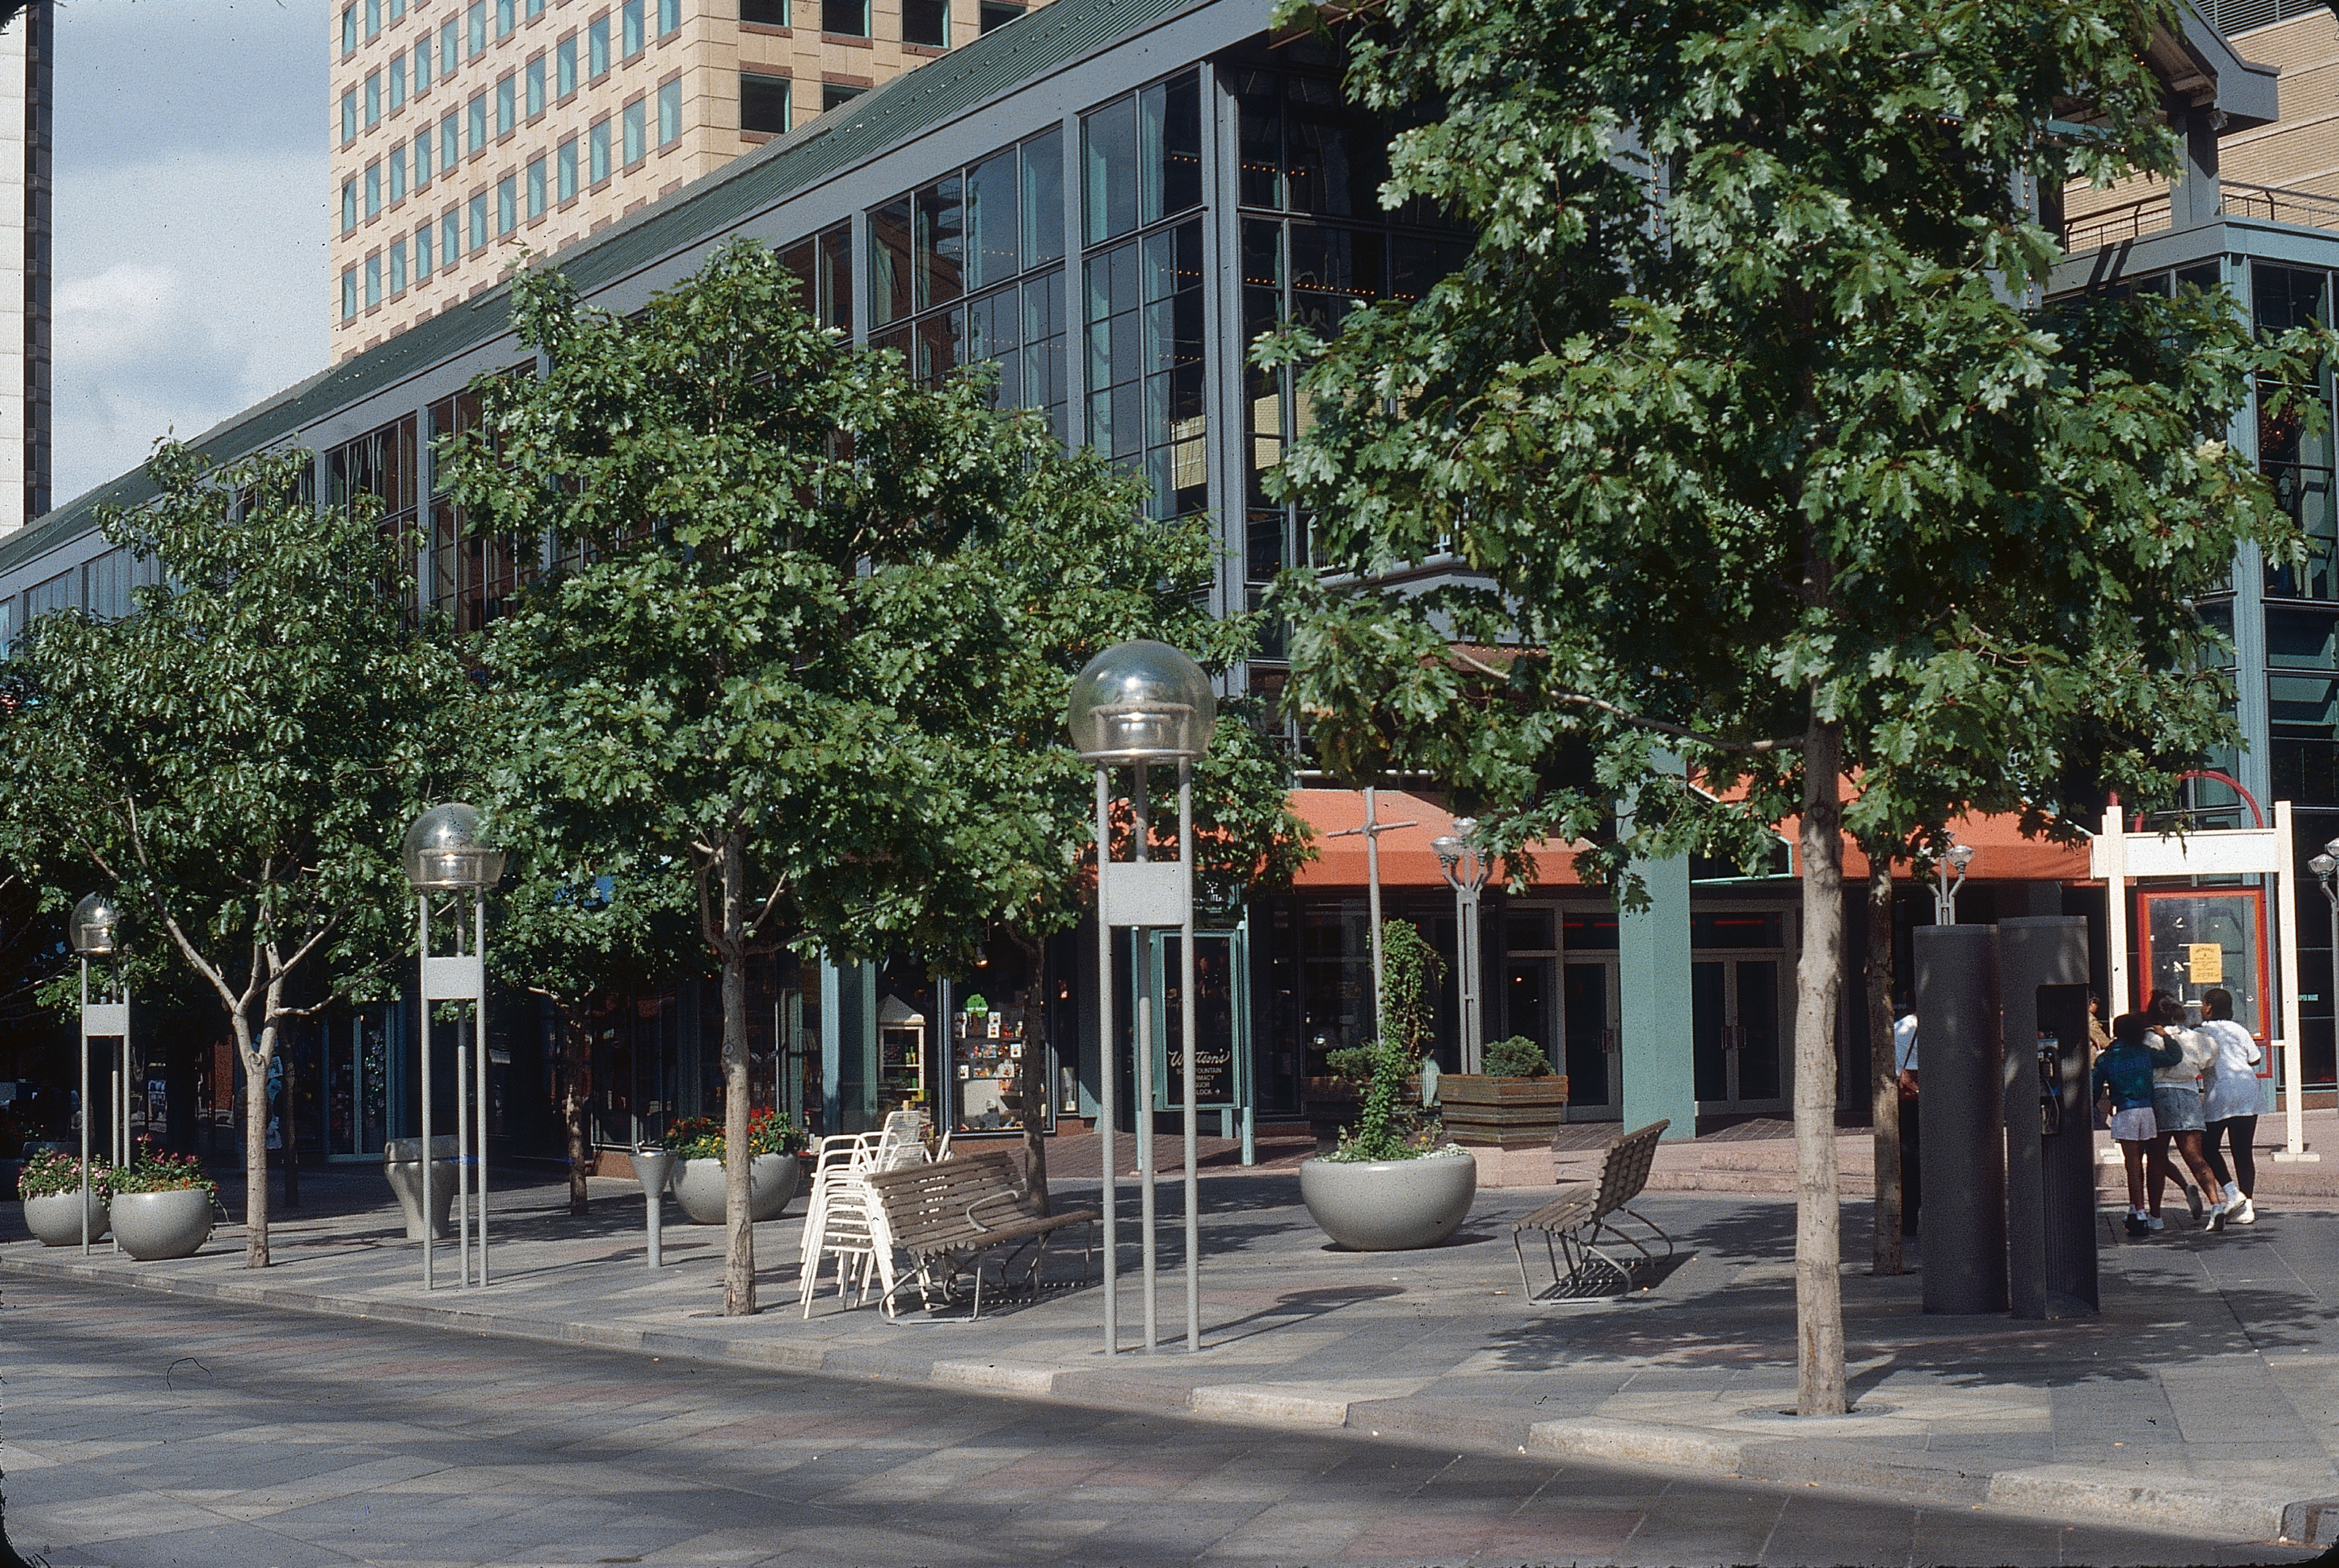 The 16th Street Mall trees in 1988. Photo credit: Tom Perry